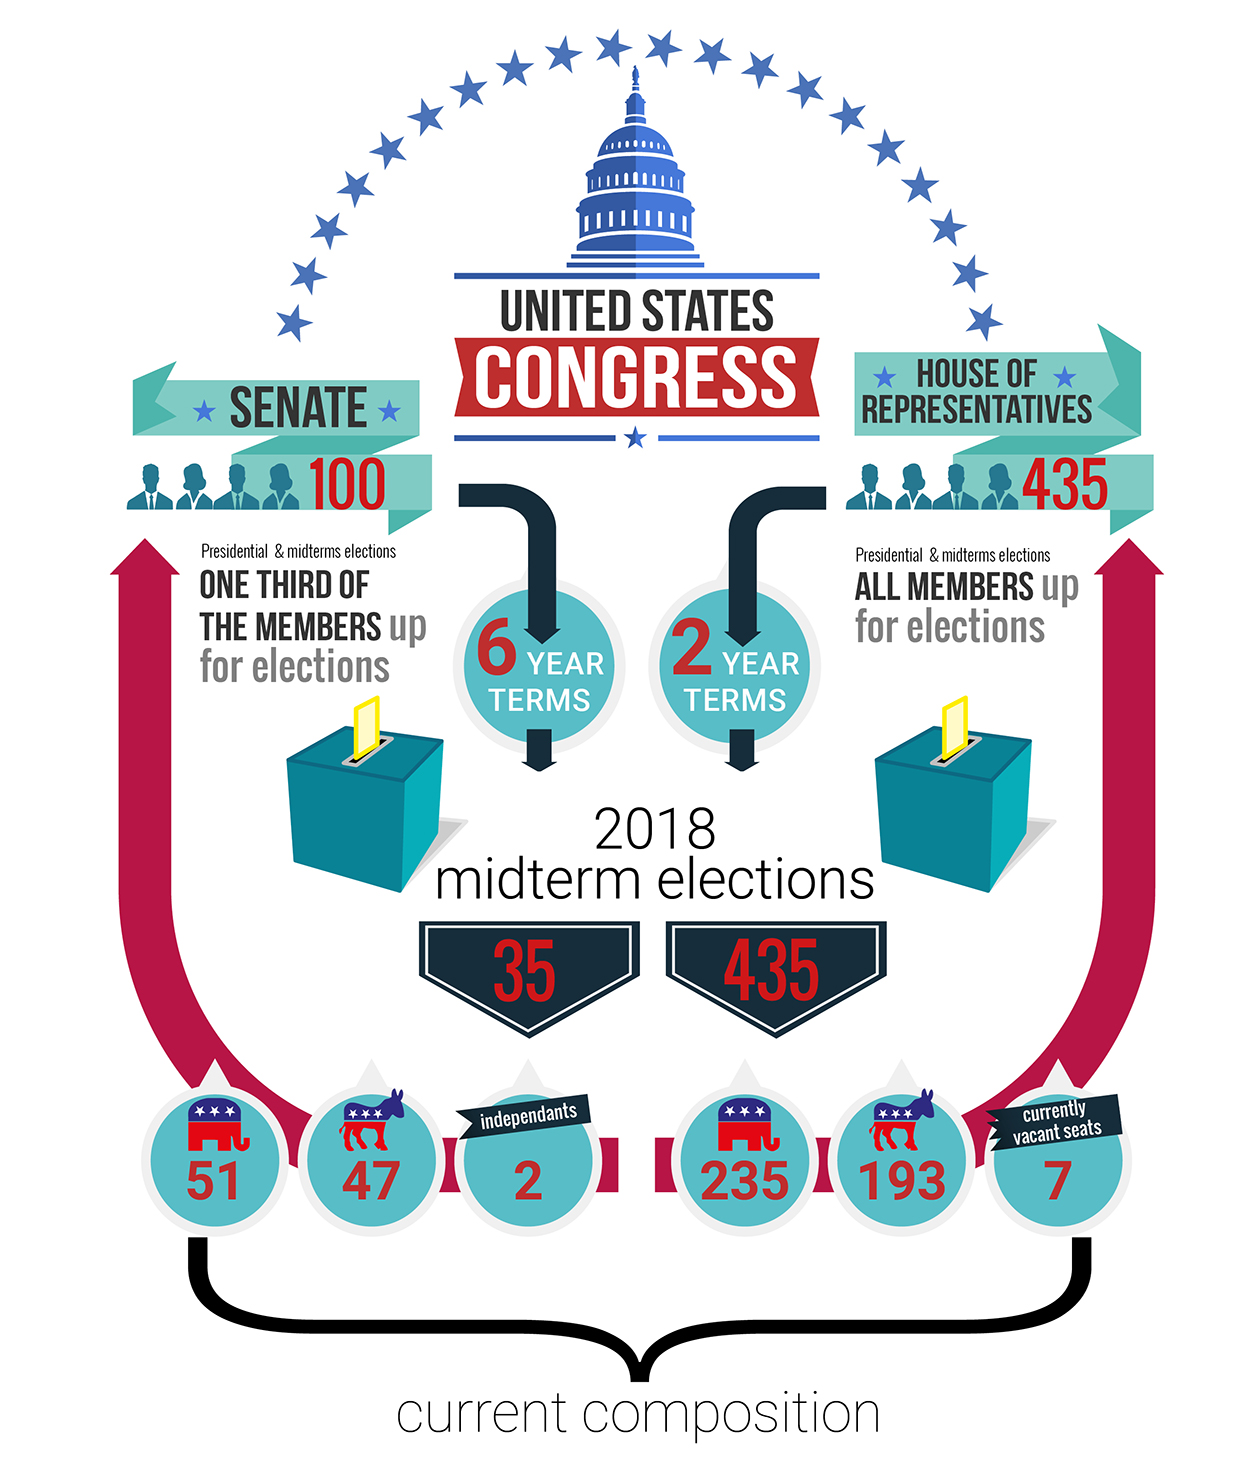 An infographic showing the number of members in each house of congress and how many are up for election in the 2018 midterms